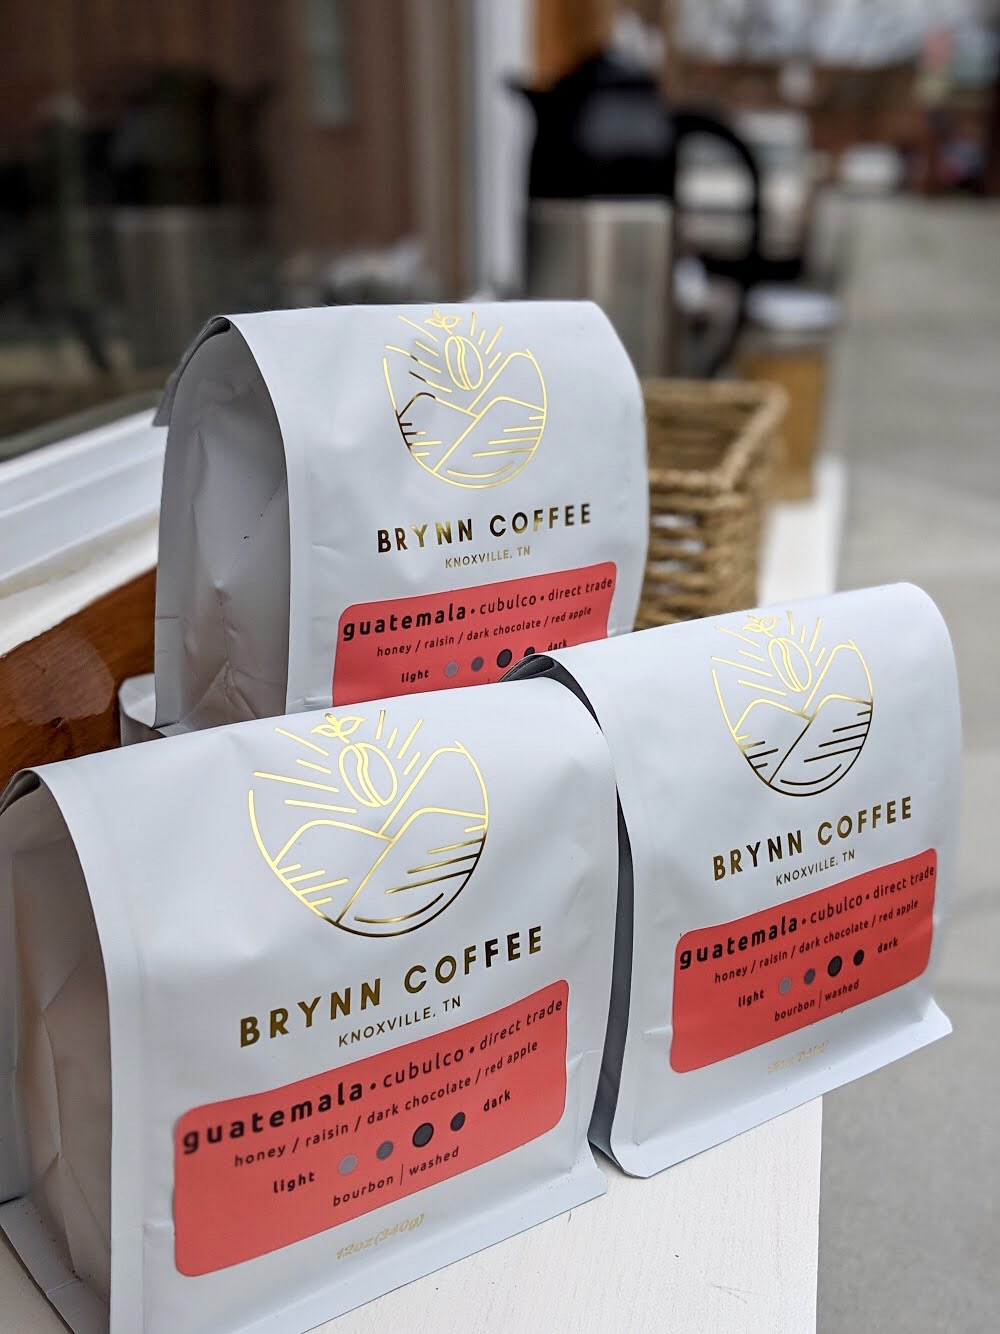 Brynn Coffee Knoxville